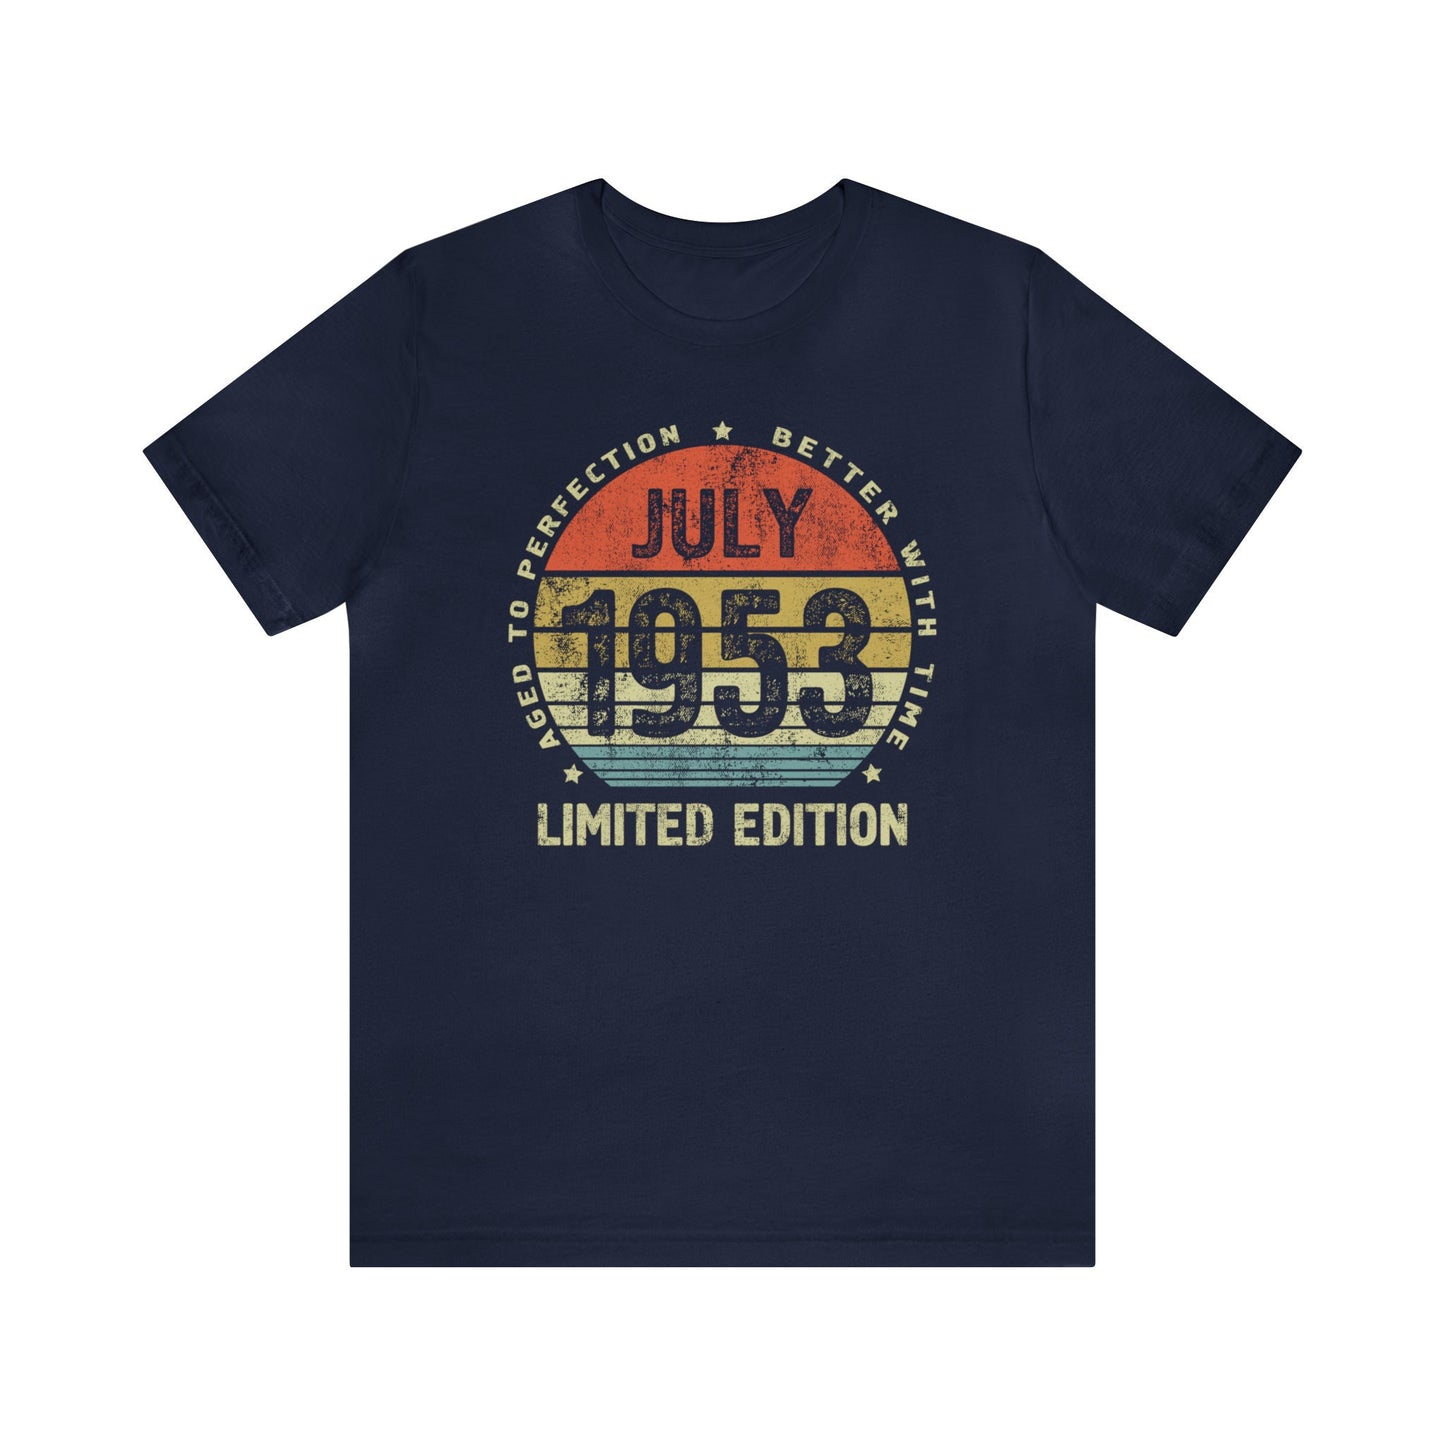 July 1953 birthday shirt for women or men, Gift  t-shirt for wife or husband